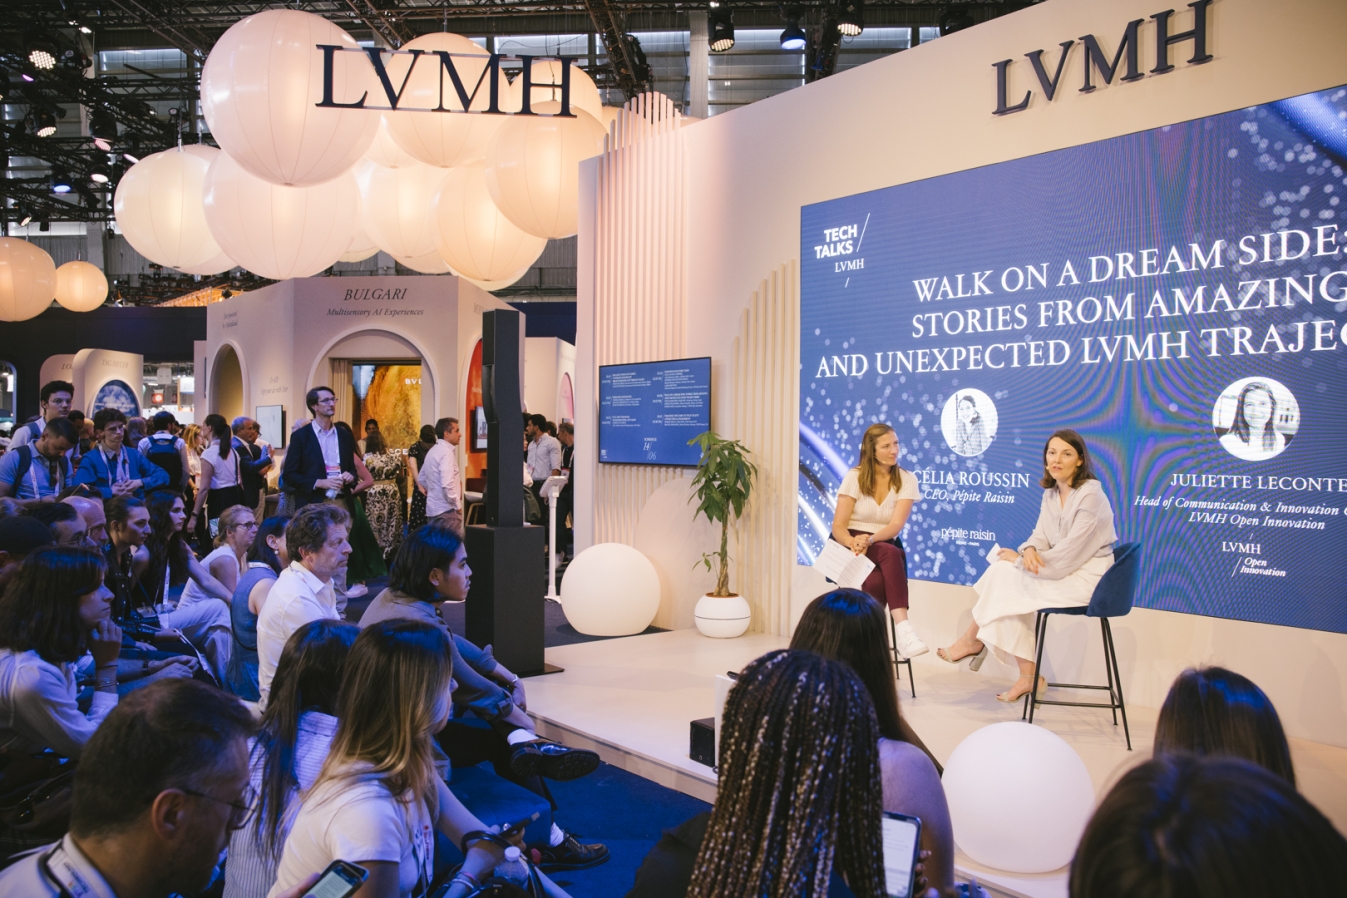 LVMH on X: It's a wrap for Day 1 at @VivaTech where the dream